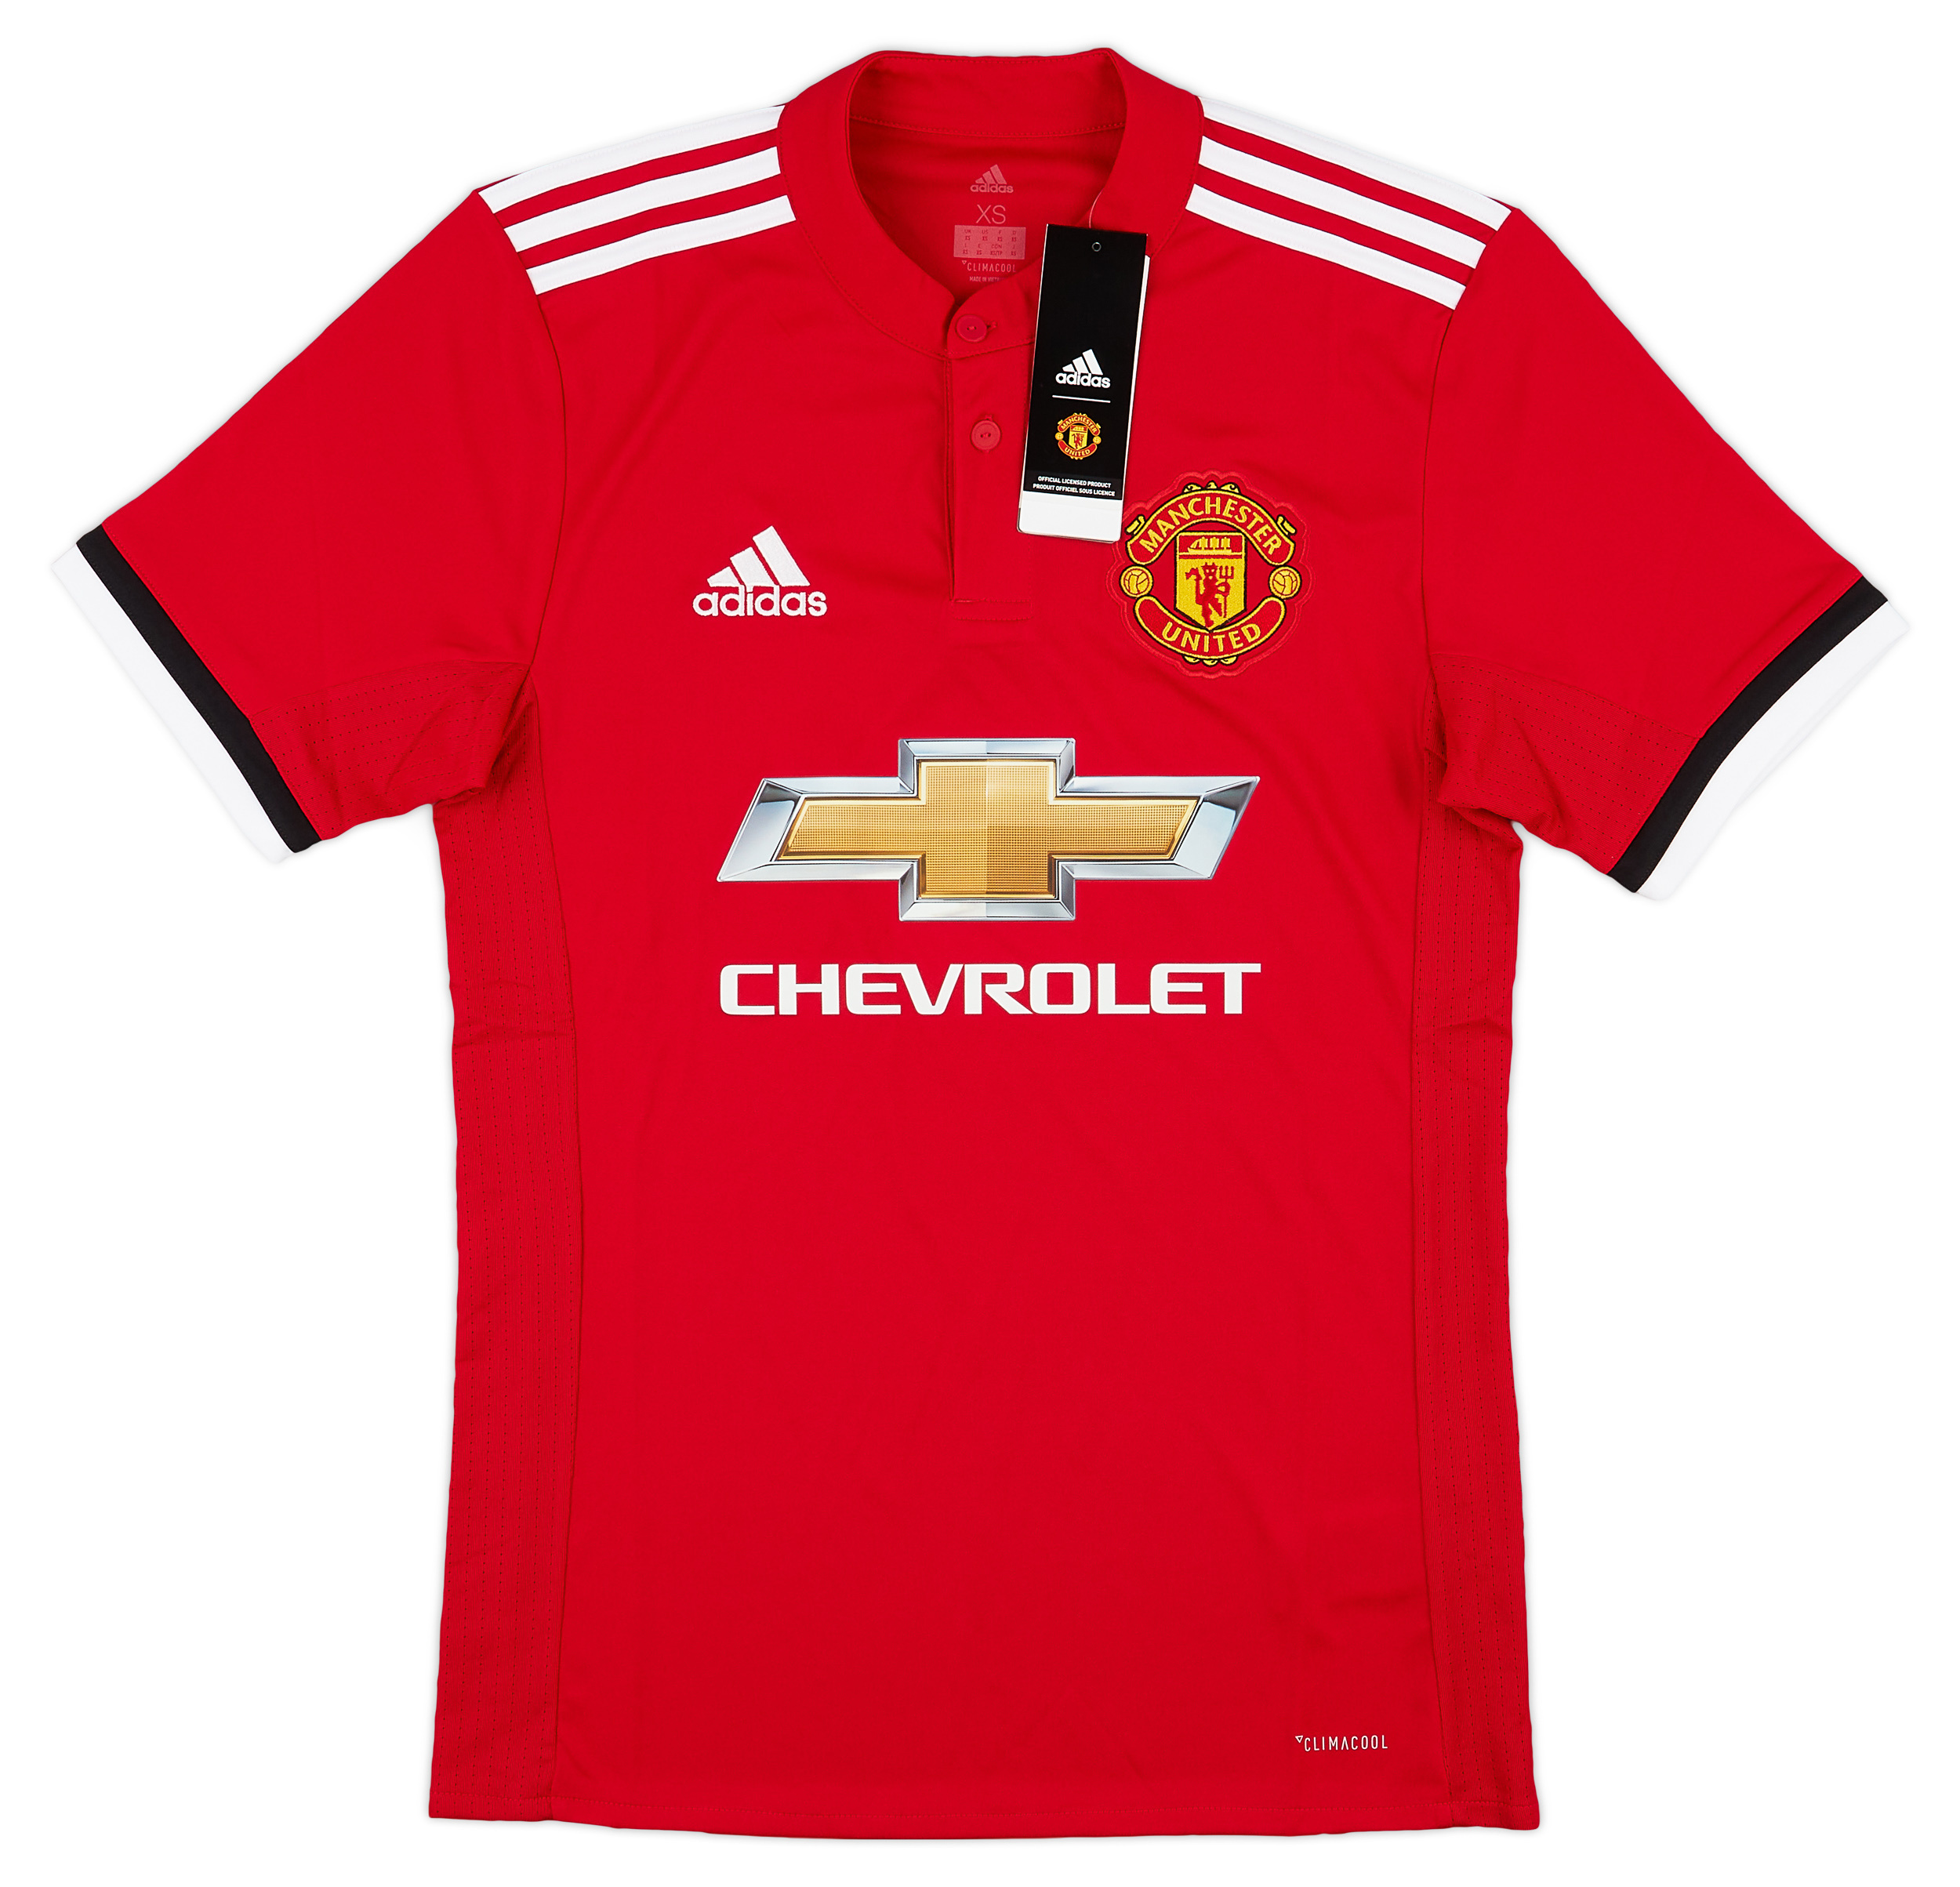 2017-18 Manchester United Home Shirt ()